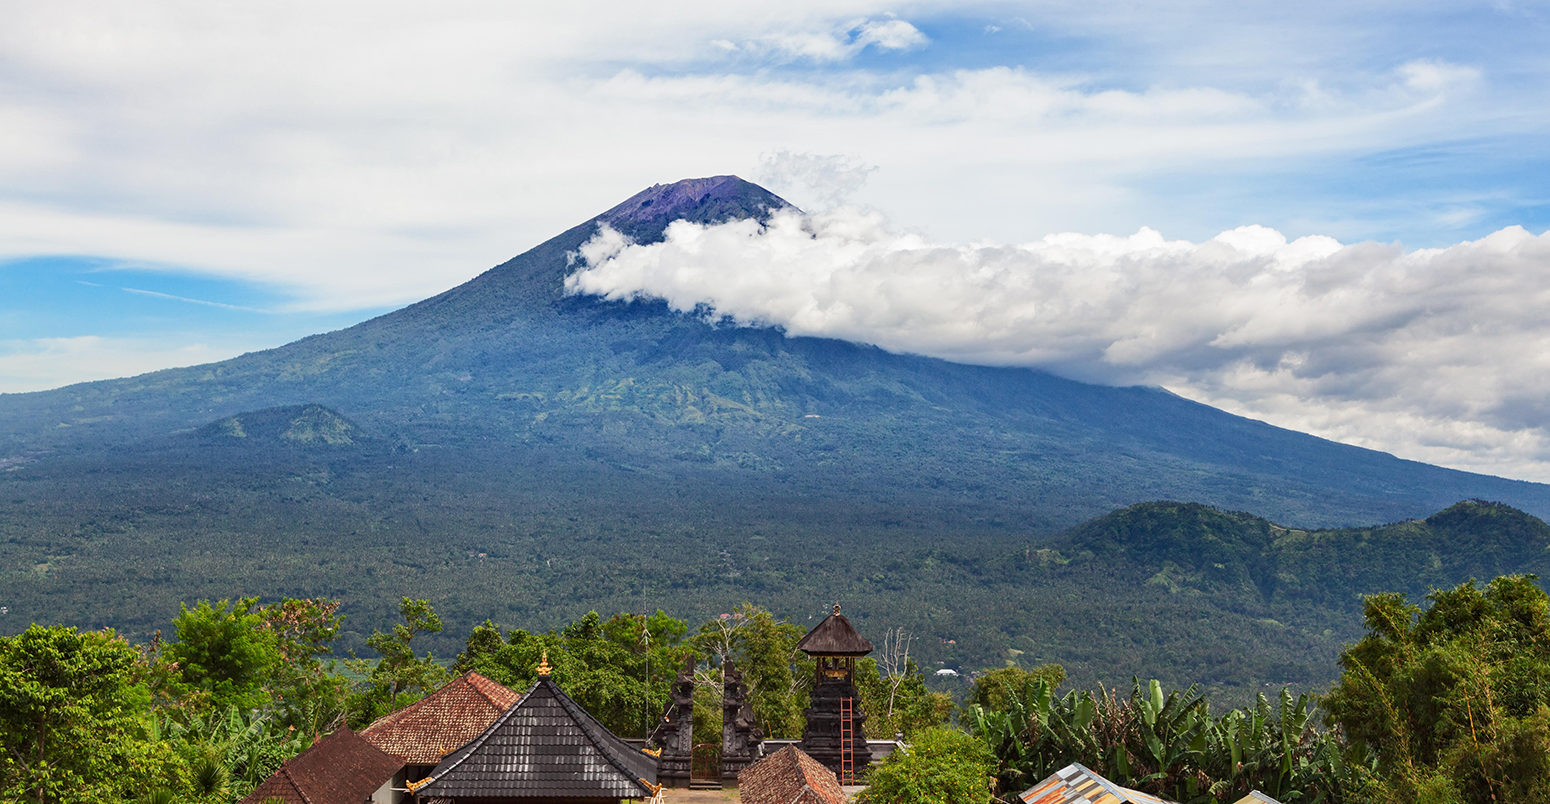 K9NHH6 View from Lempuyang mountain to traditional Balinese temple on Mount Agung slopes background. Mount Agung is highest active volcano on Bali island.